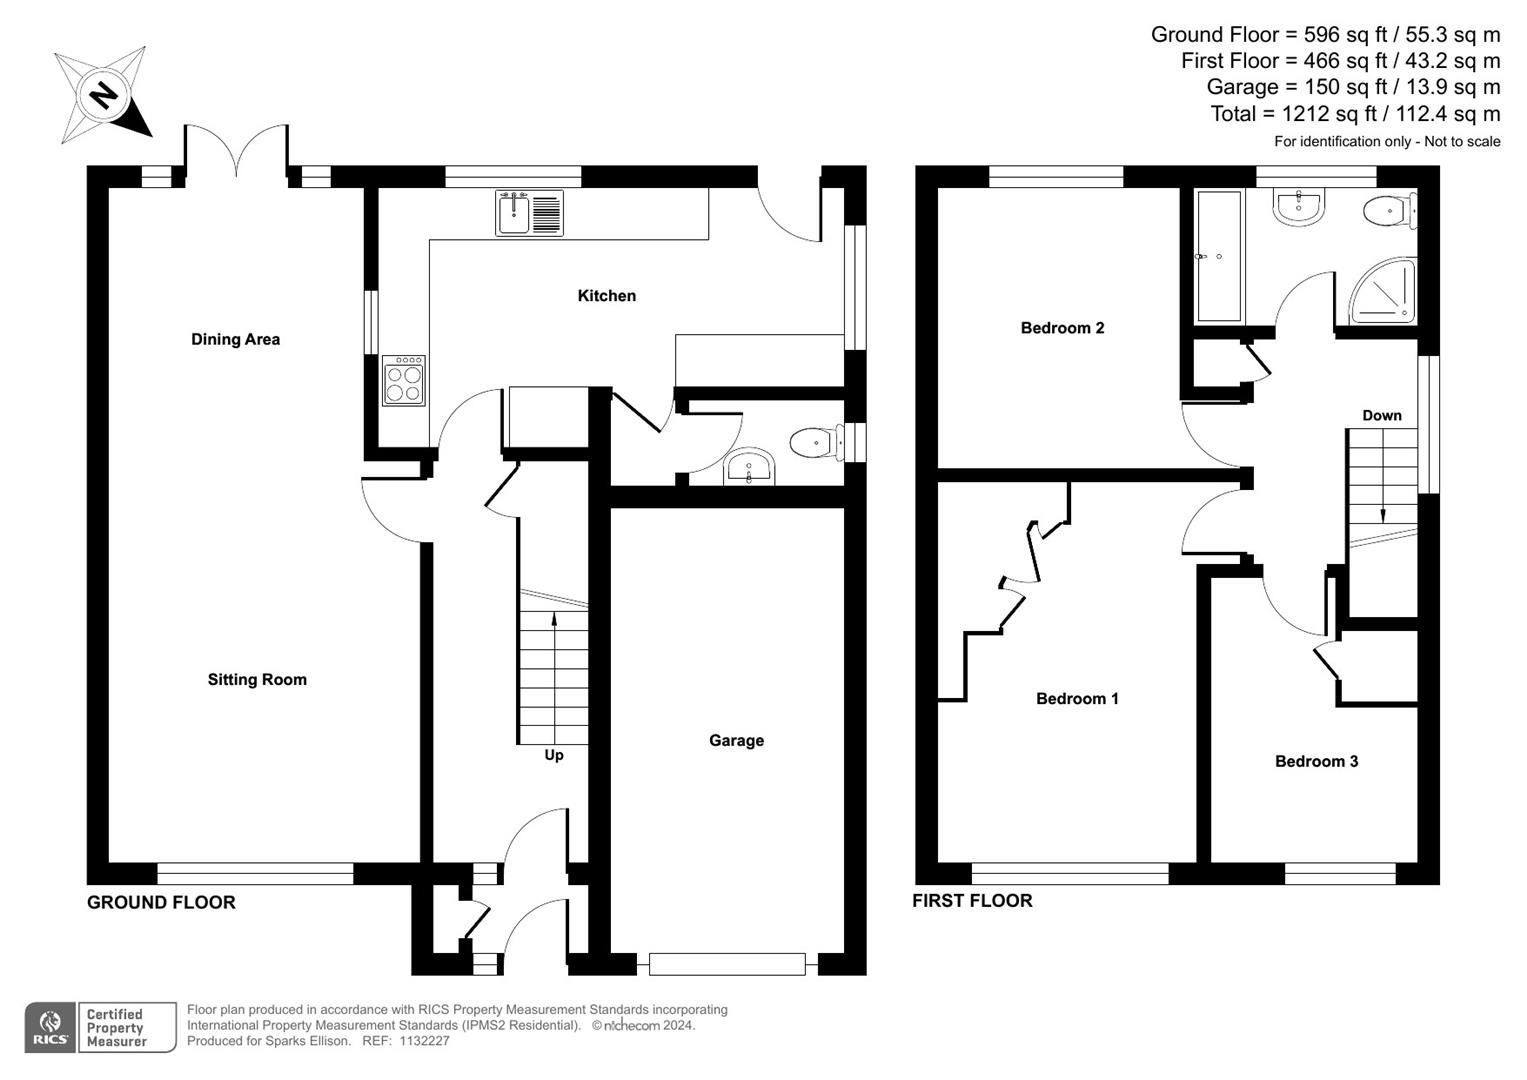 Meon Crescent, Chandlers Ford floorplan